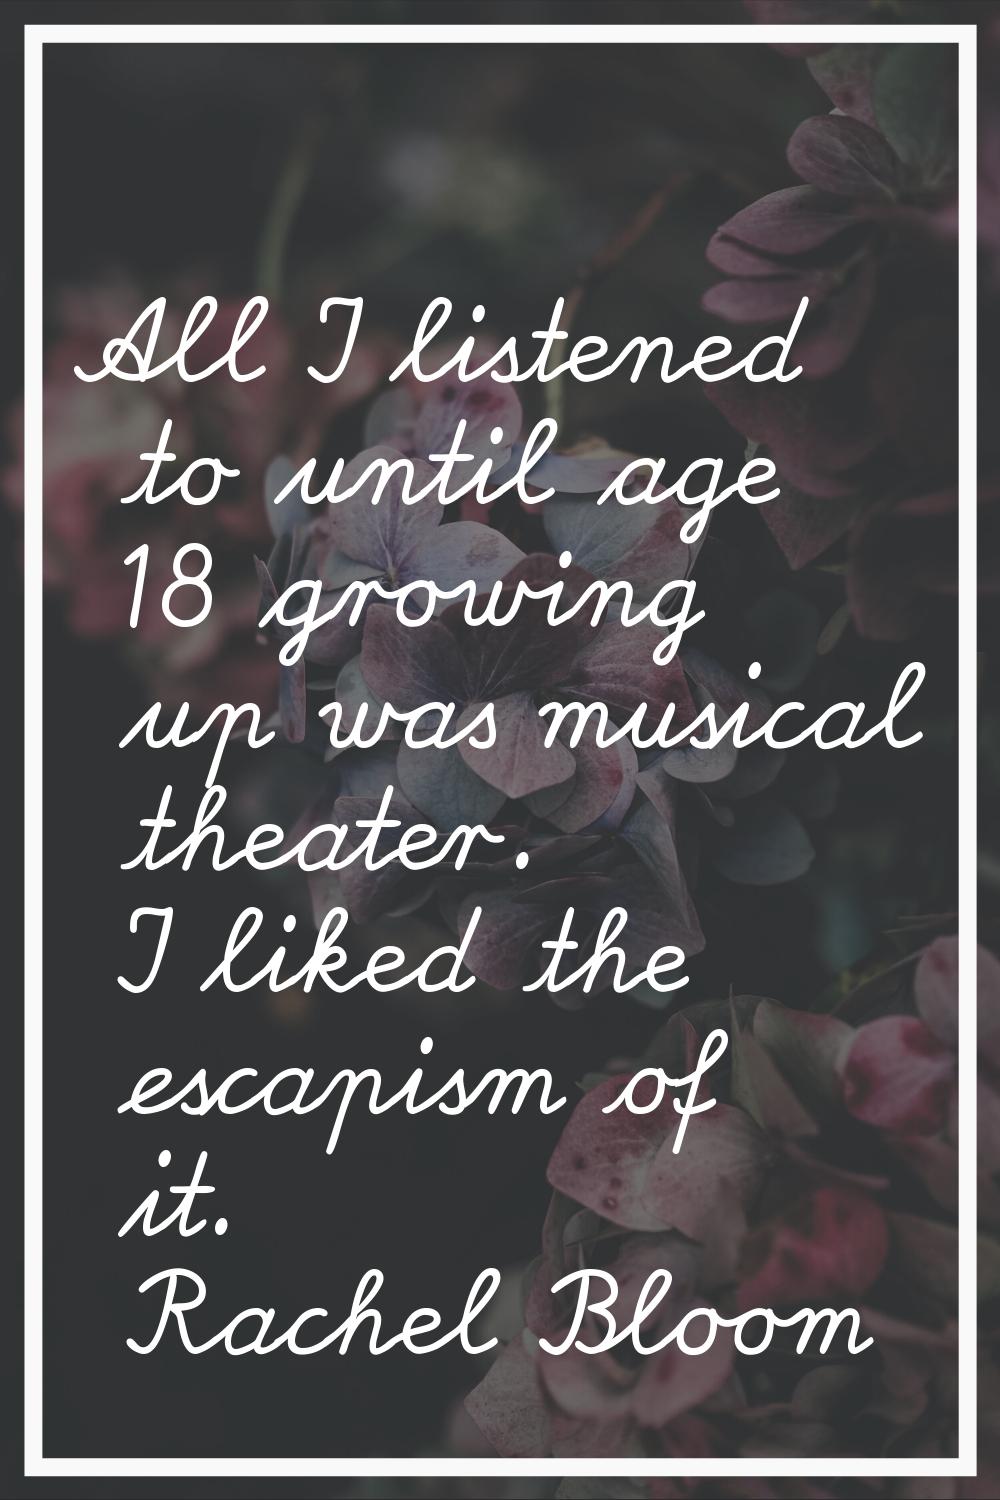 All I listened to until age 18 growing up was musical theater. I liked the escapism of it.